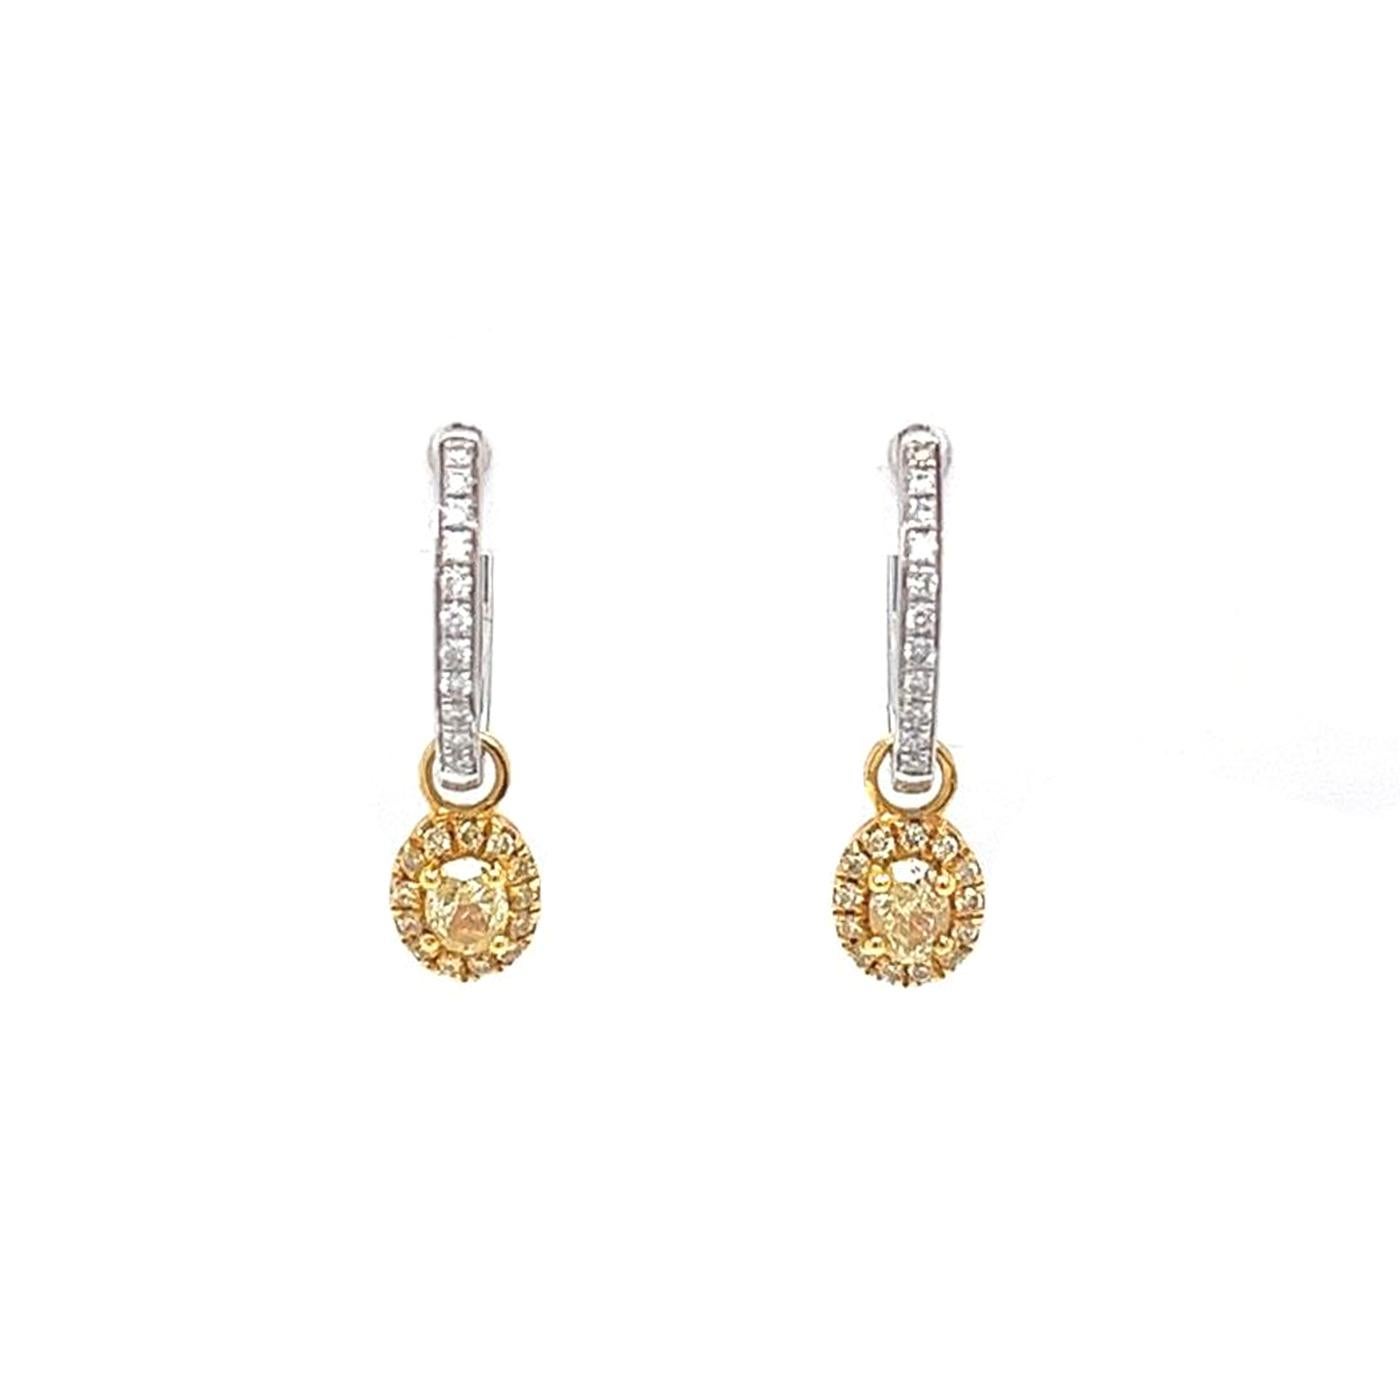 Make a statement with these luxurious 18k White gold hoop earrings, featuring a total carat weight of 1.25ctw diamonds. with 0.95ctw Fancy Yellow Diamonds, these earrings are designed to add a touch of glamour to any outfit. Crafted from